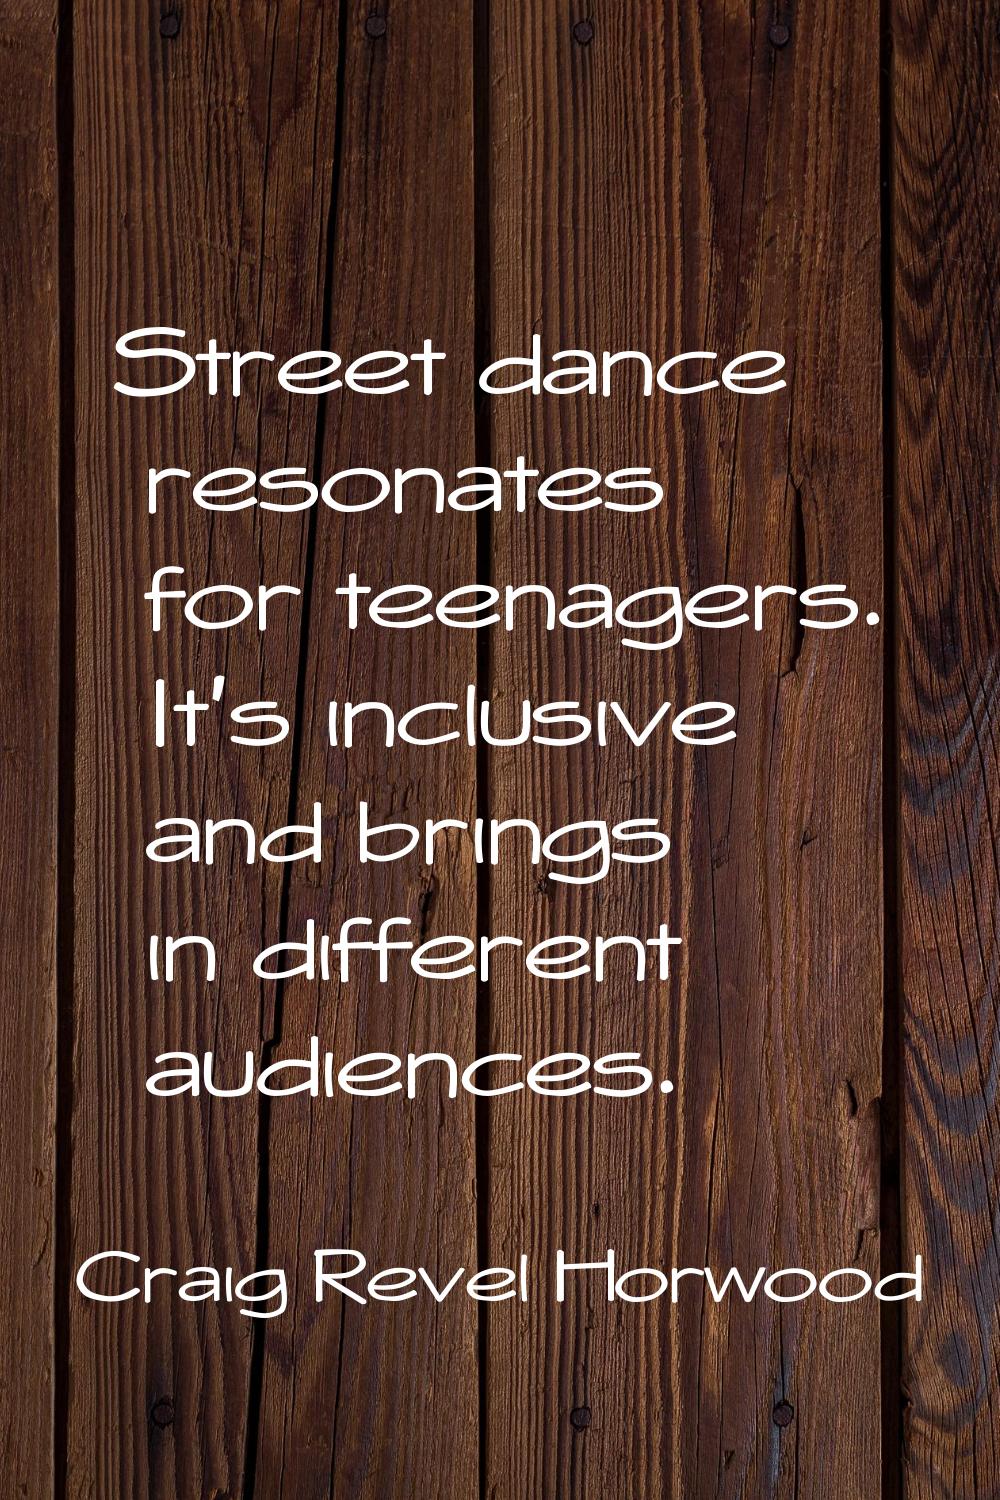 Street dance resonates for teenagers. It's inclusive and brings in different audiences.